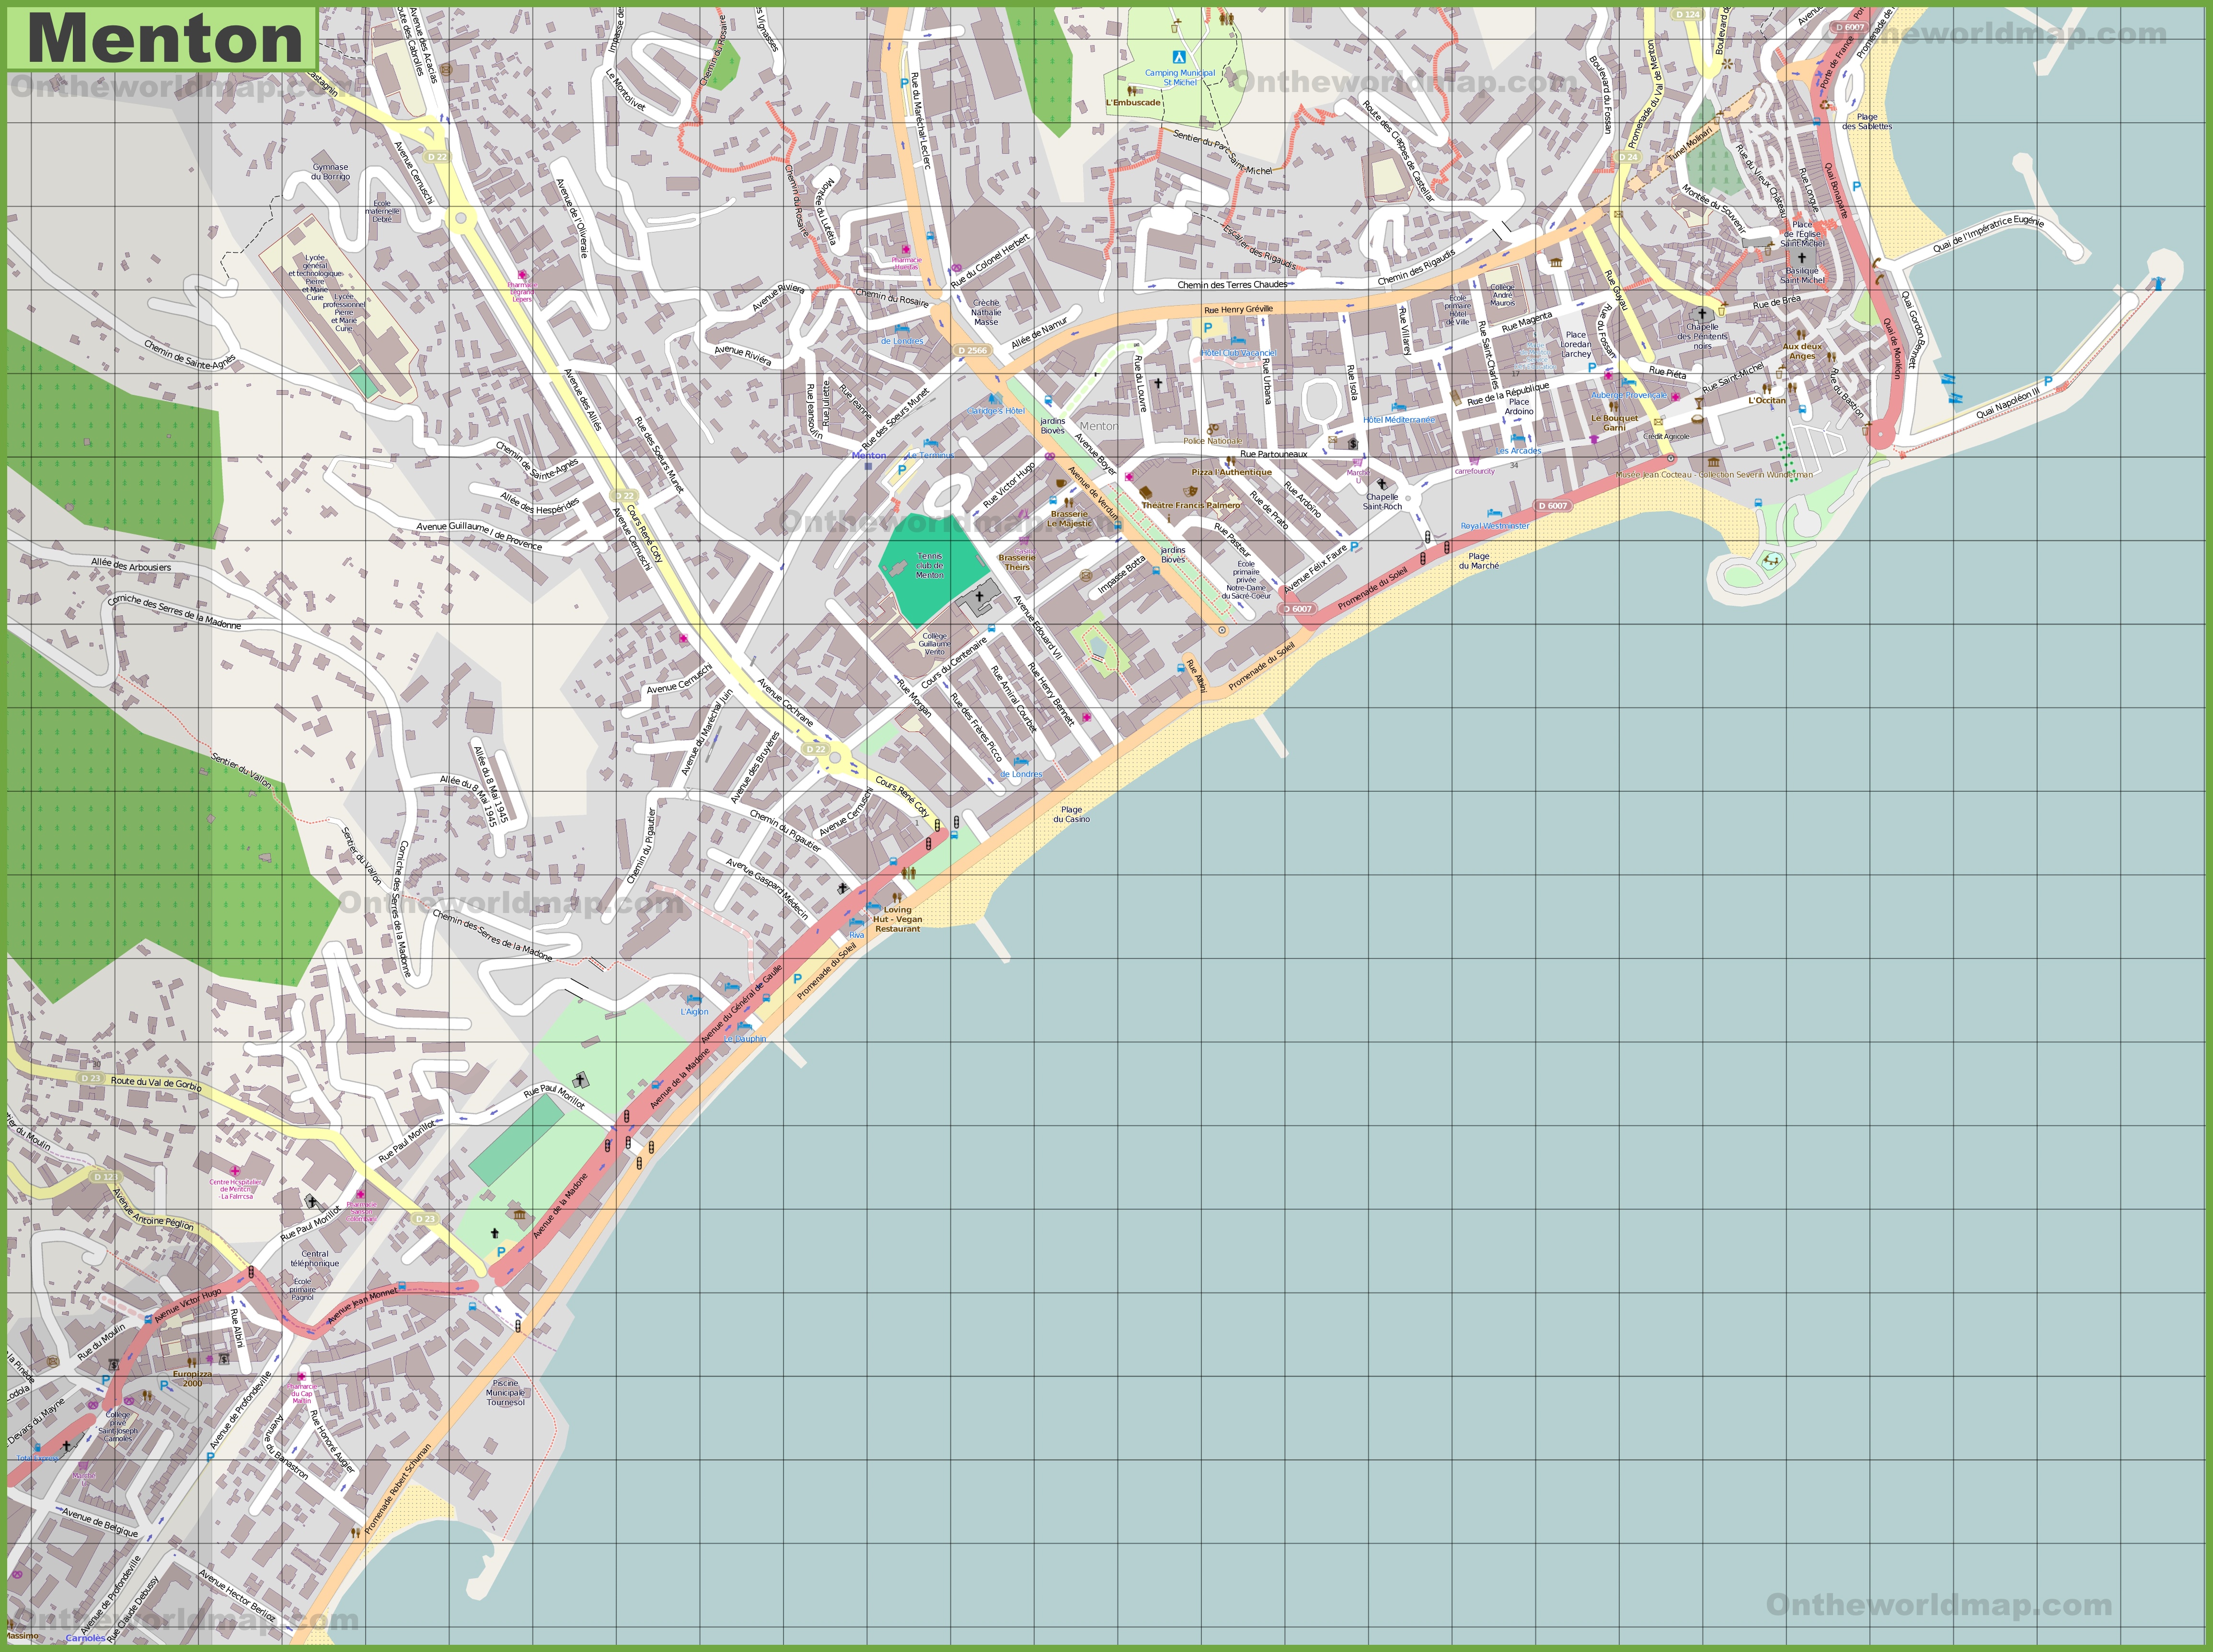 Map of Menton France and Surrounding Towns